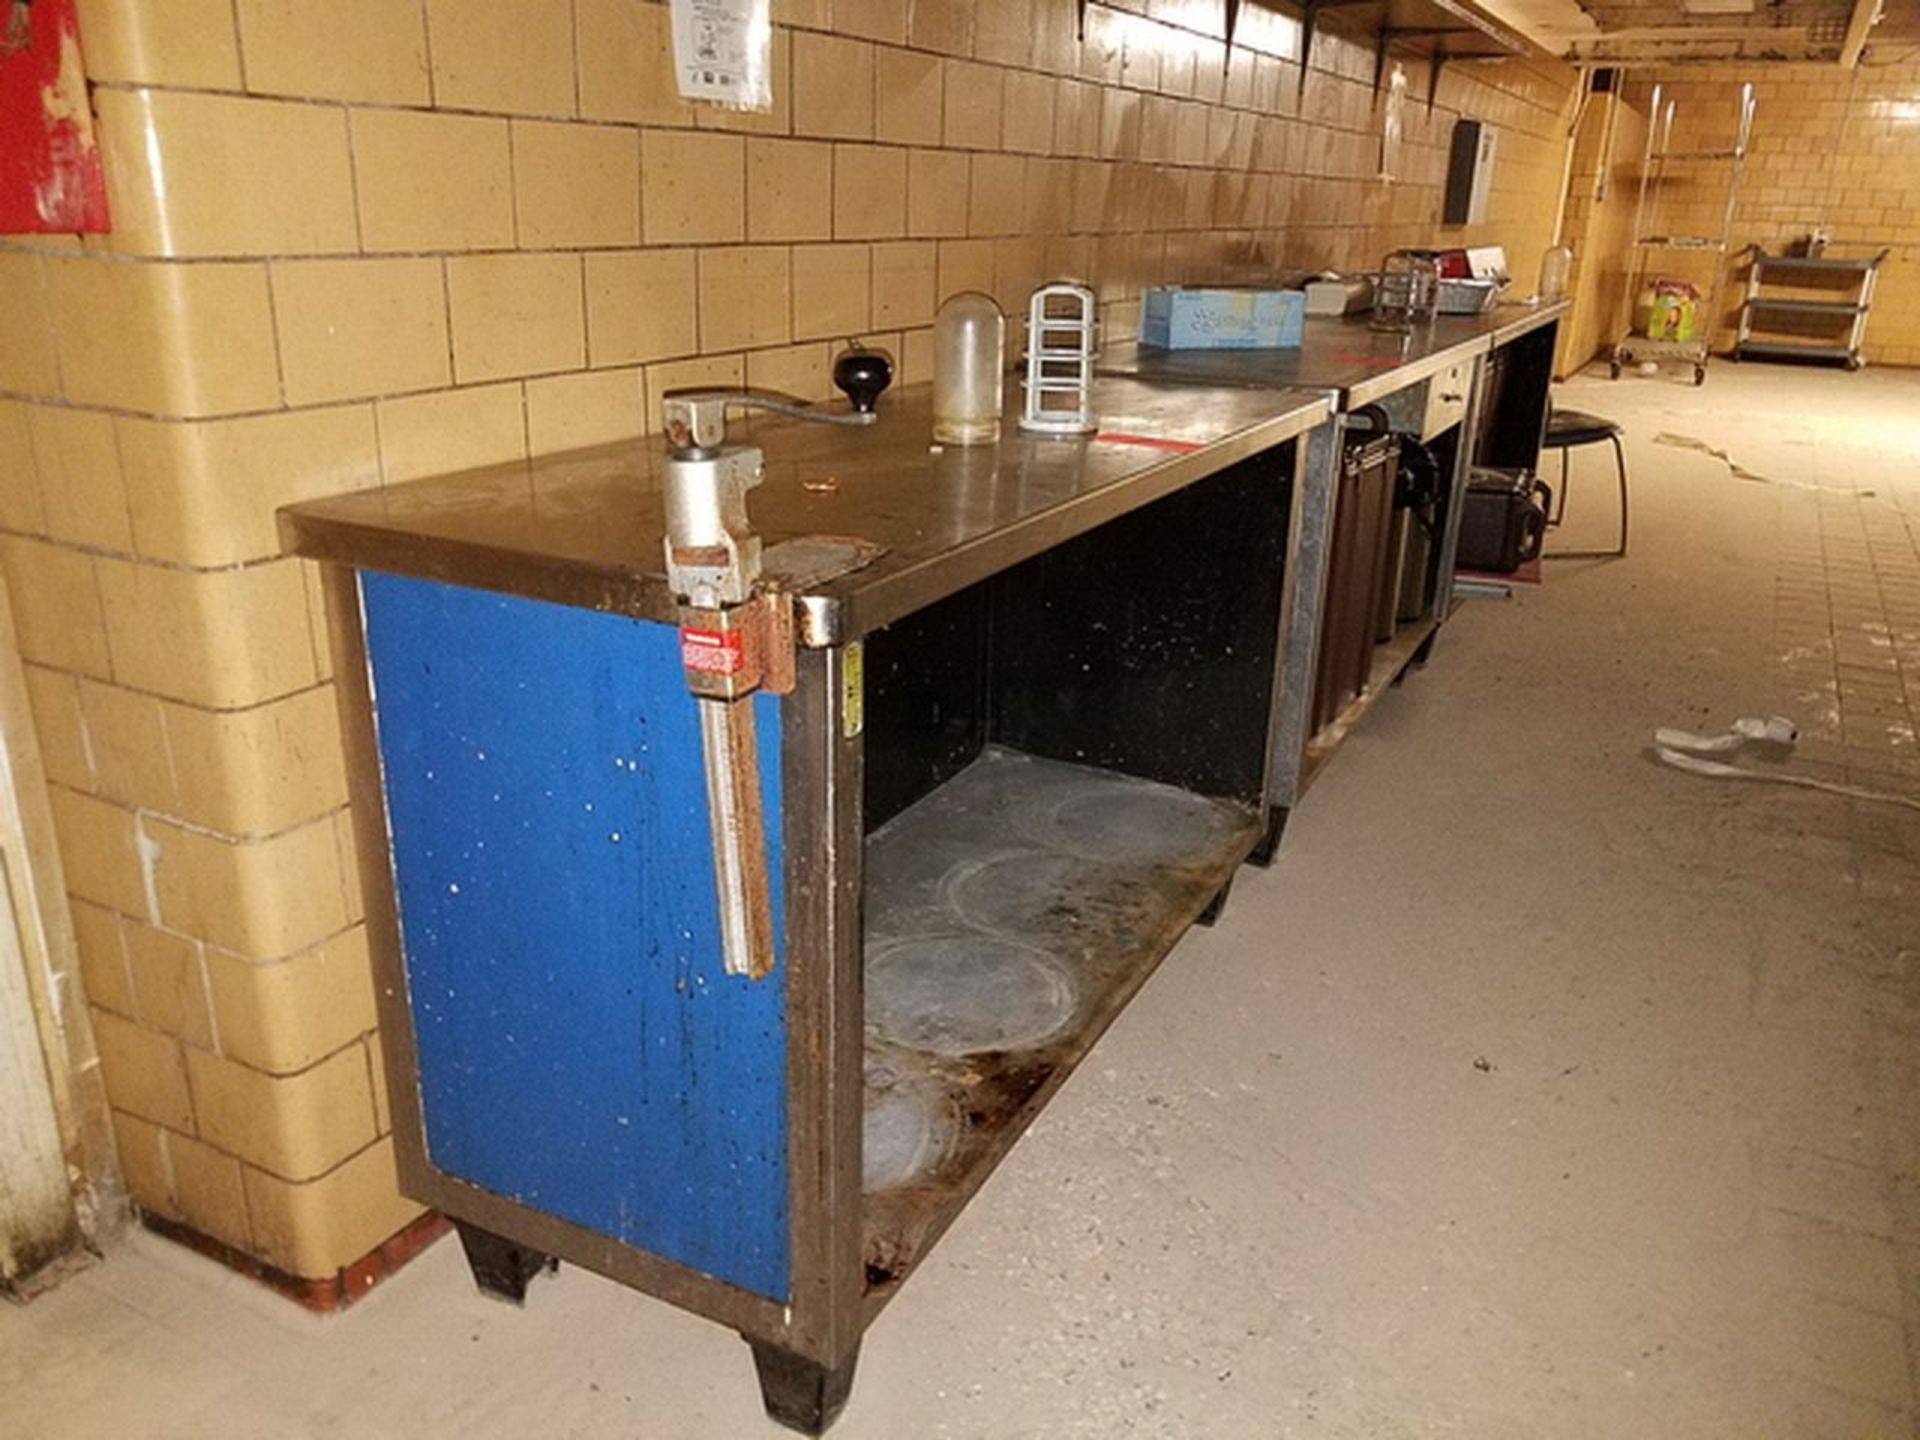 Lot of (3) Stainless Steel Food Preparation Tables, 24" x 60", includes contents. (Bsmt Cafeteria)